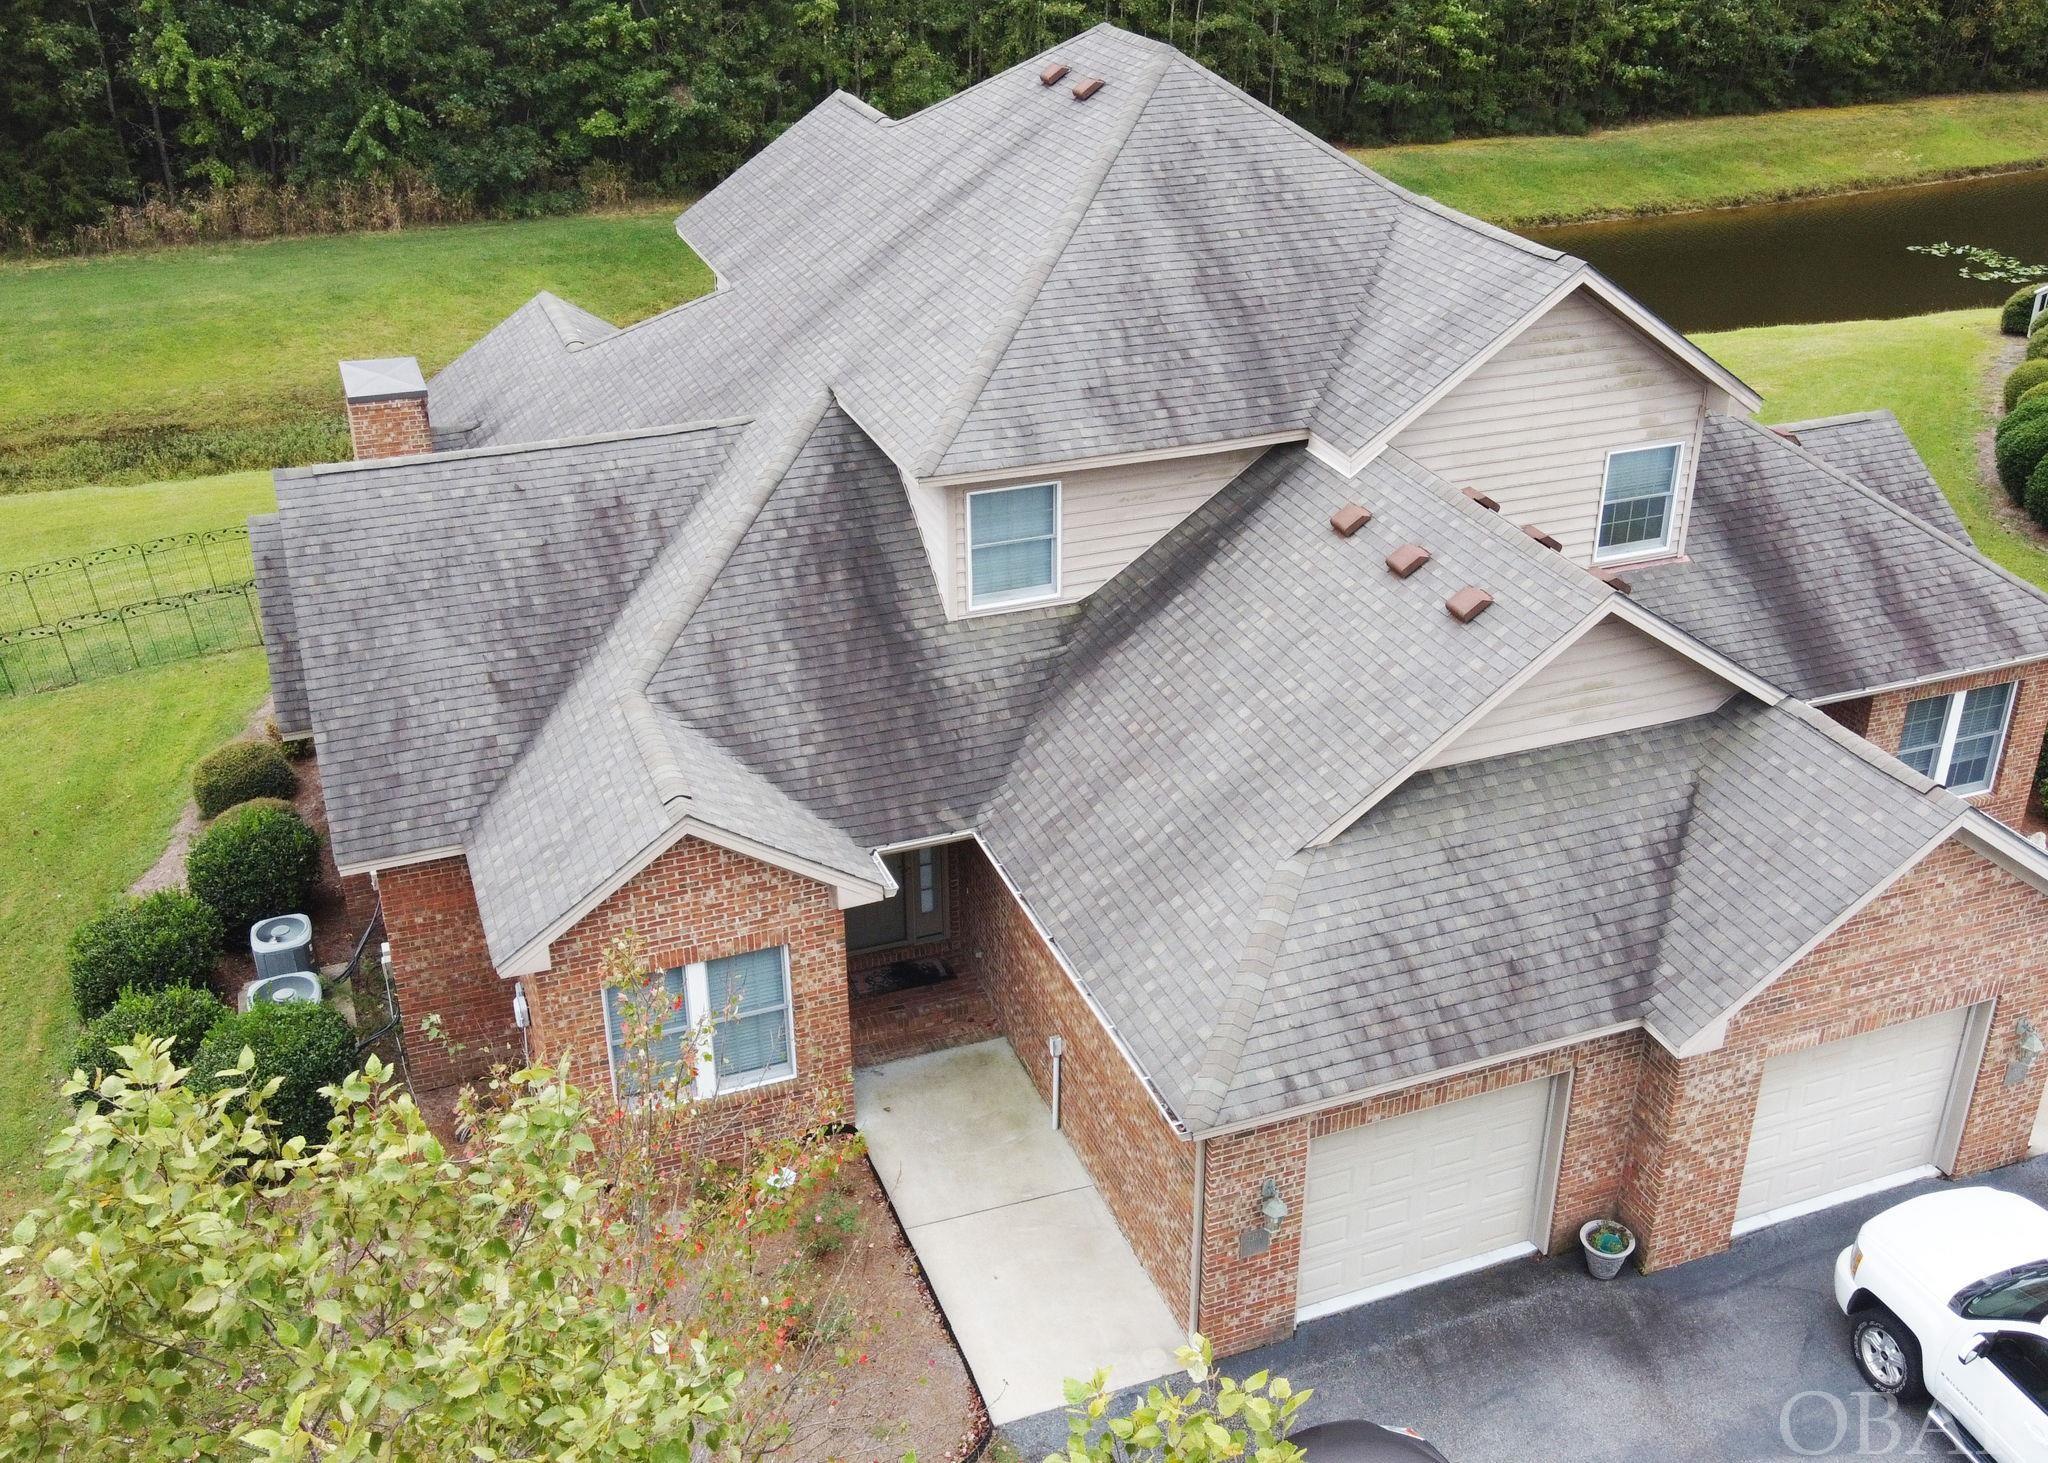 136A Golf Club Drive, Elizabeth City, NC 27909, 3 Bedrooms Bedrooms, ,2 BathroomsBathrooms,Residential,For Sale,Golf Club Drive,120481